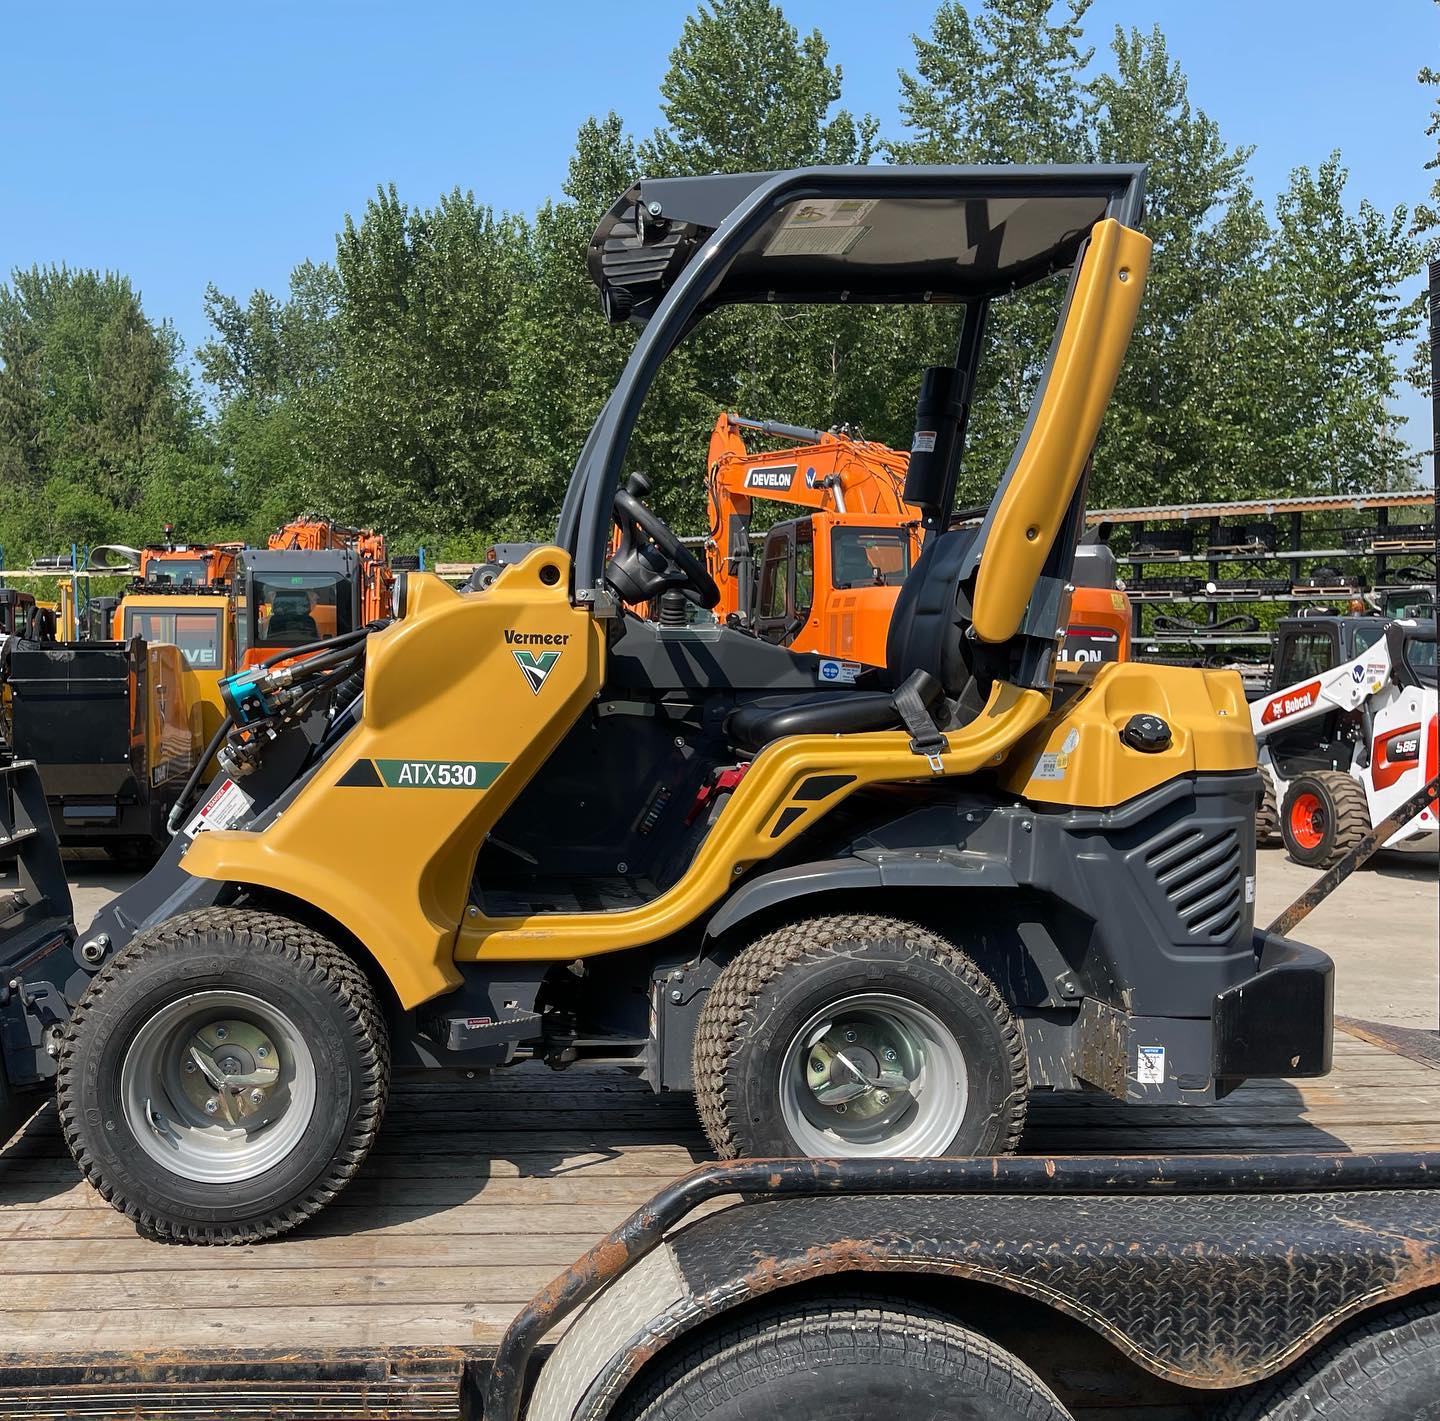 The Vermeer Articulating loader is one of the most versatile pieces we offer. This new ATX530 is off to its new home today! Currently have 4 sizes available for your needs @westerraequipment #vermeerbc #atx #articulatingloader #vermeer #landscaping #treecare #municipal #construction #snowremoval